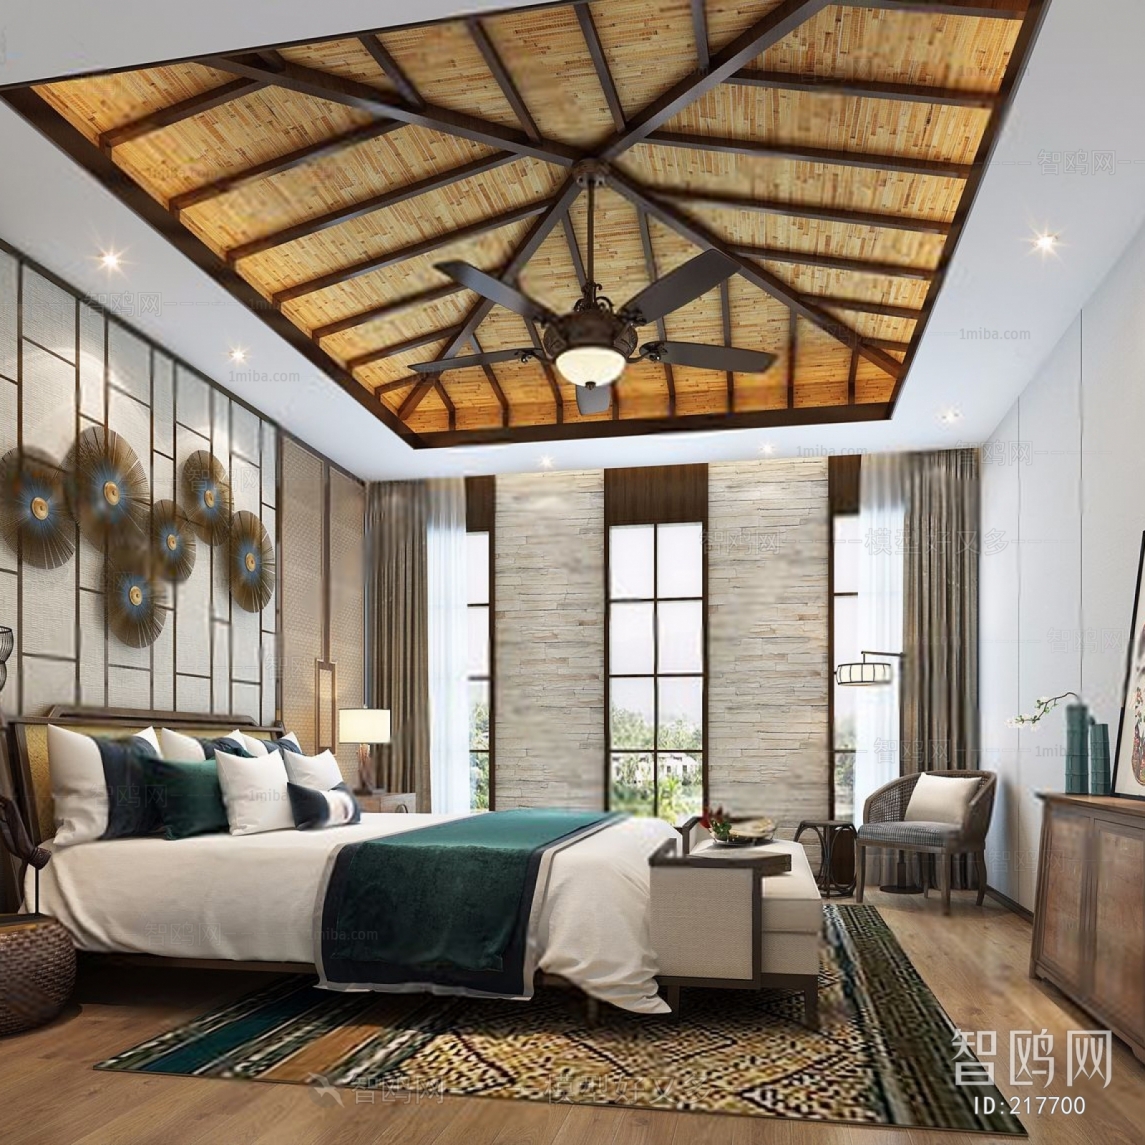 Southeast Asian Style Bedroom